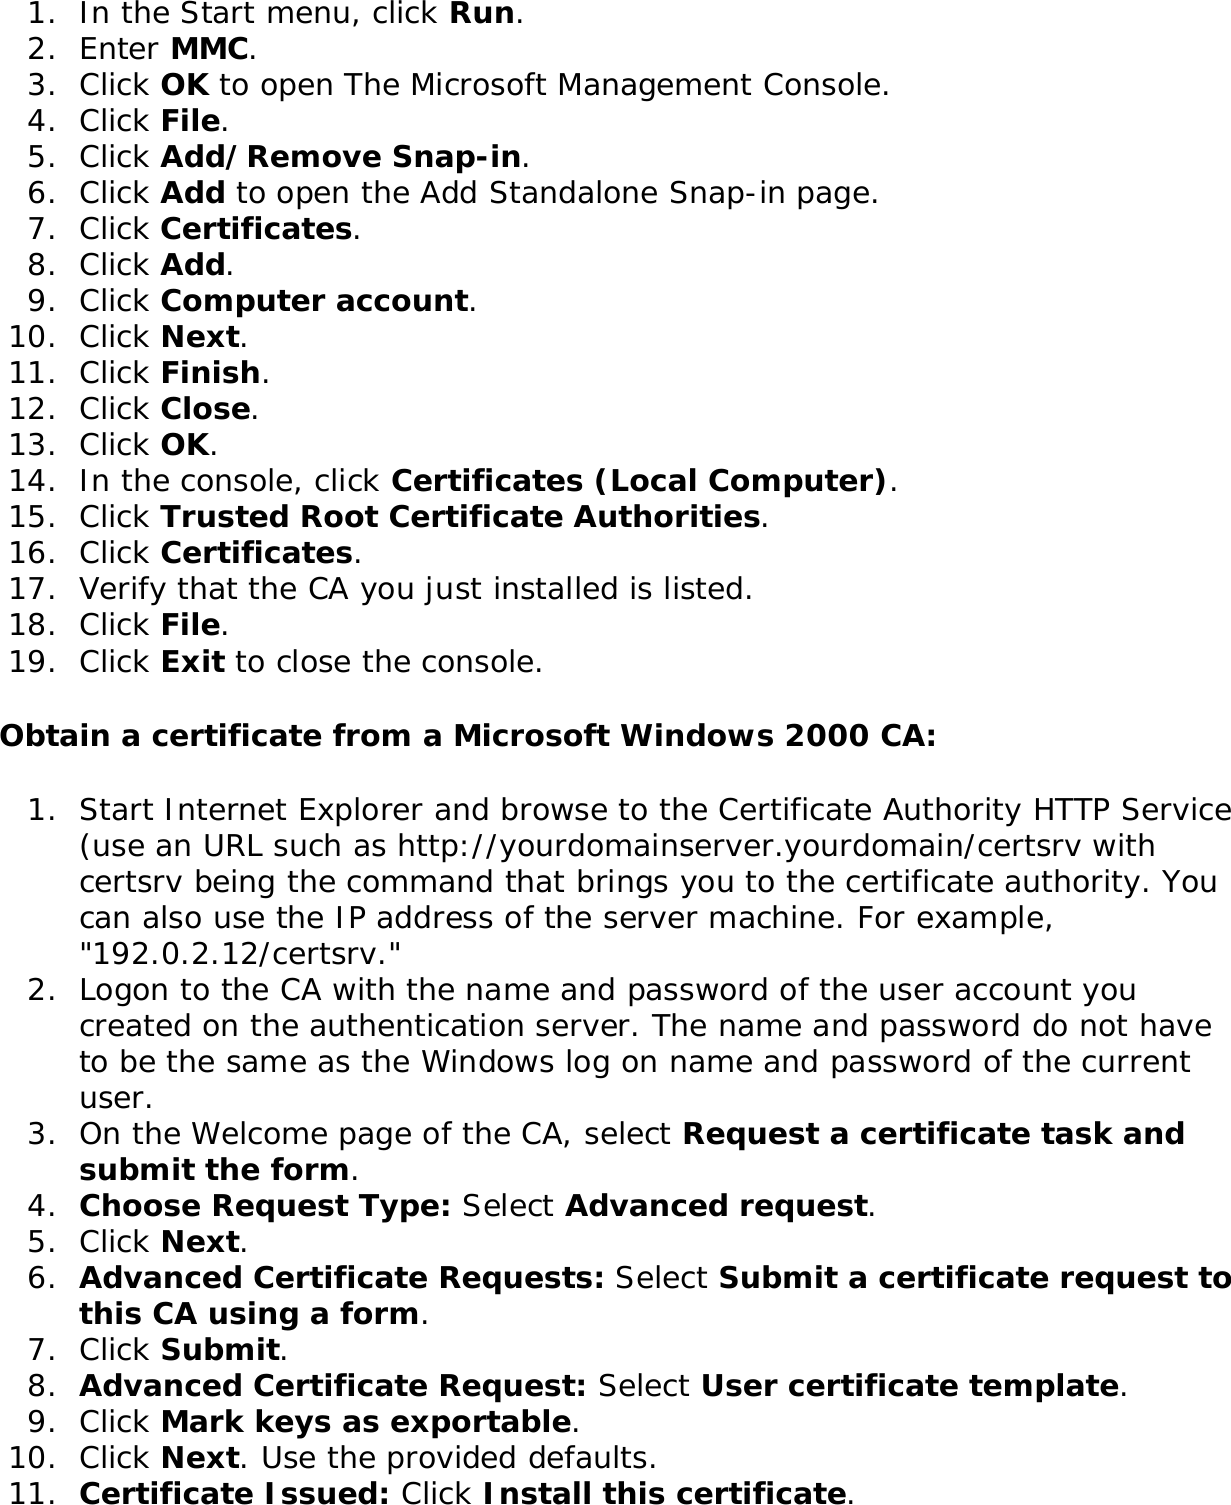 1.  In the Start menu, click Run.2.  Enter MMC. 3.  Click OK to open The Microsoft Management Console.4.  Click File.5.  Click Add/Remove Snap-in.6.  Click Add to open the Add Standalone Snap-in page.7.  Click Certificates.8.  Click Add.9.  Click Computer account.10.  Click Next.11.  Click Finish.12.  Click Close.13.  Click OK.14.  In the console, click Certificates (Local Computer).15.  Click Trusted Root Certificate Authorities.16.  Click Certificates.17.  Verify that the CA you just installed is listed.18.  Click File.19.  Click Exit to close the console.Obtain a certificate from a Microsoft Windows 2000 CA: 1.  Start Internet Explorer and browse to the Certificate Authority HTTP Service (use an URL such as http://yourdomainserver.yourdomain/certsrv with certsrv being the command that brings you to the certificate authority. You can also use the IP address of the server machine. For example, &quot;192.0.2.12/certsrv.&quot;2.  Logon to the CA with the name and password of the user account you created on the authentication server. The name and password do not have to be the same as the Windows log on name and password of the current user. 3.  On the Welcome page of the CA, select Request a certificate task and submit the form. 4.  Choose Request Type: Select Advanced request.5.  Click Next. 6.  Advanced Certificate Requests: Select Submit a certificate request to this CA using a form.7.  Click Submit. 8.  Advanced Certificate Request: Select User certificate template. 9.  Click Mark keys as exportable.10.  Click Next. Use the provided defaults. 11.  Certificate Issued: Click Install this certificate.